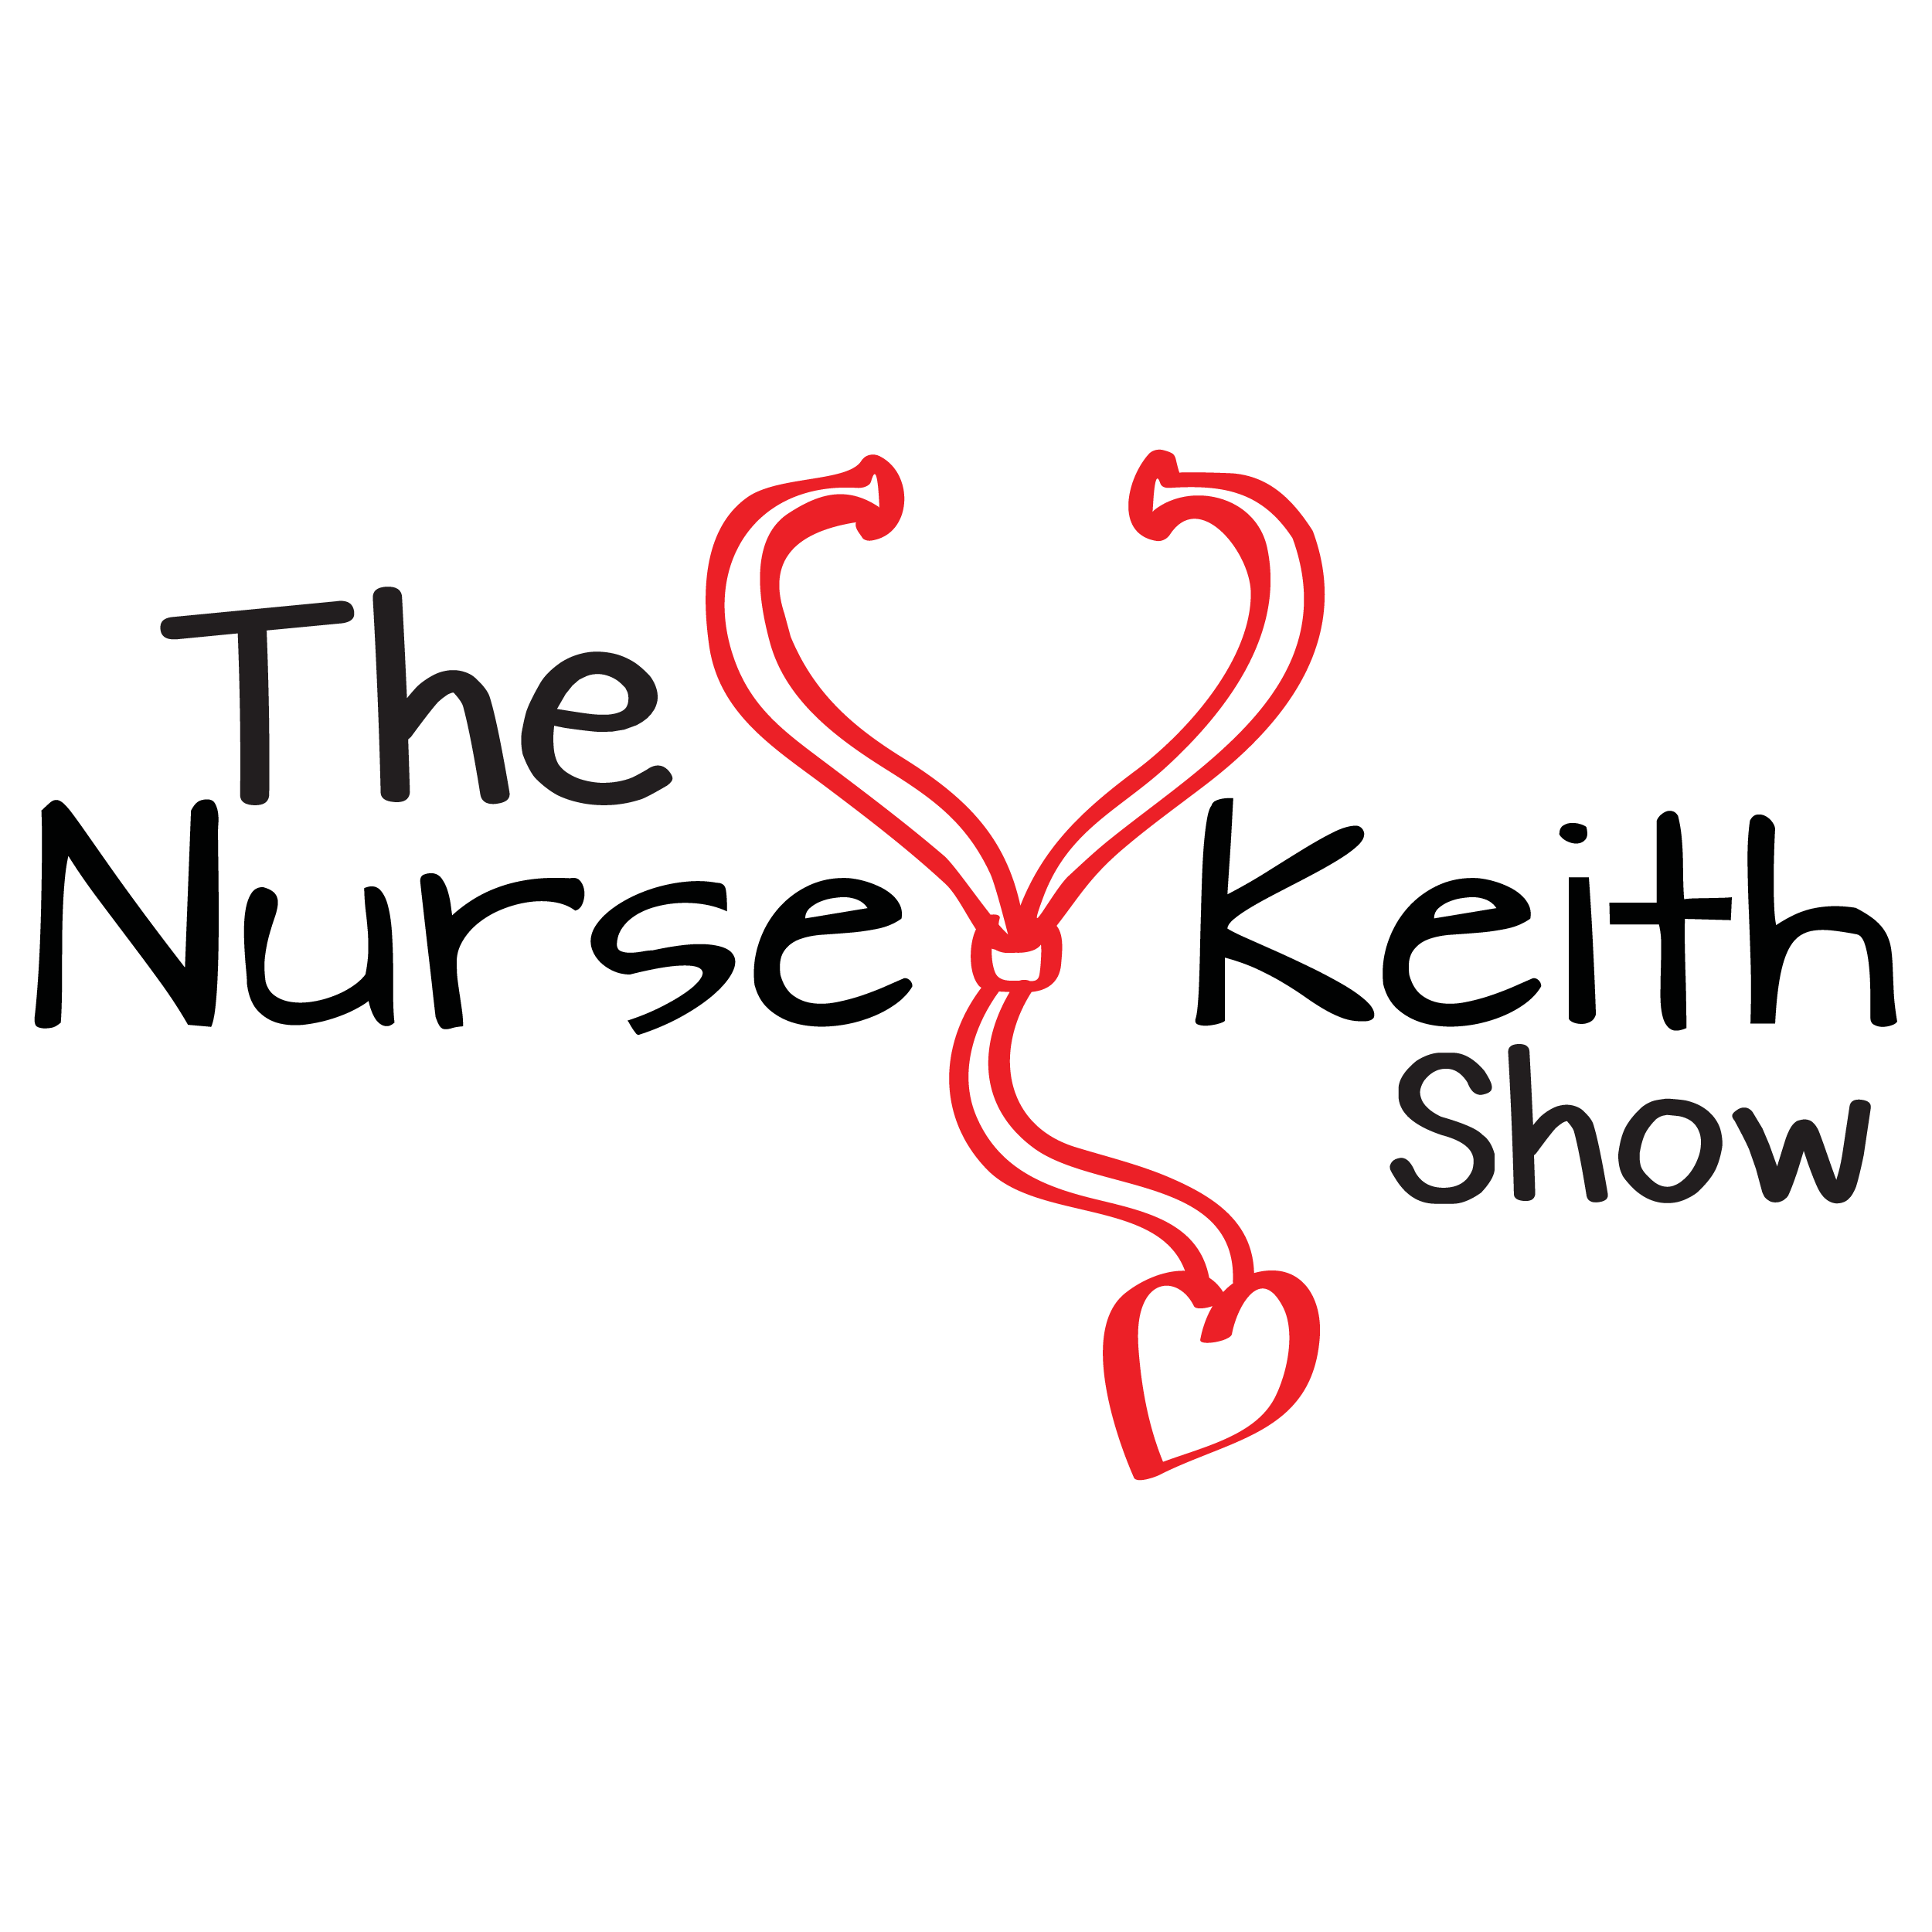 The Nurse Keith Show: The Paramount Importance of Patient Advocacy in 21st-Century Healthcare